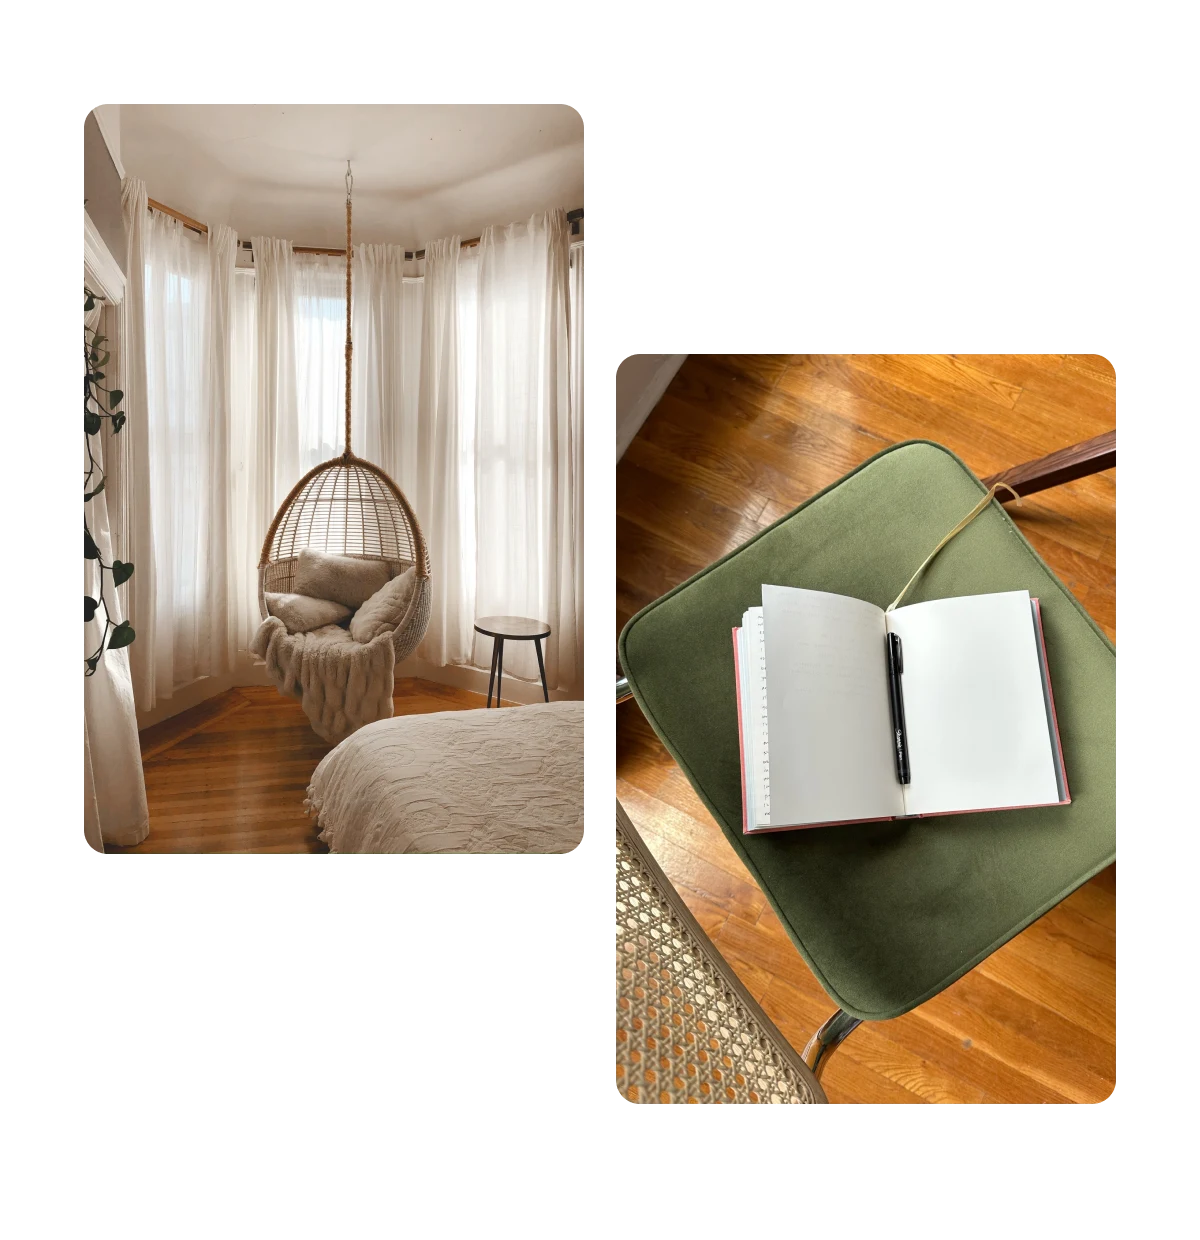 Two pins, serene bedroom with cozy chair, journal on chair